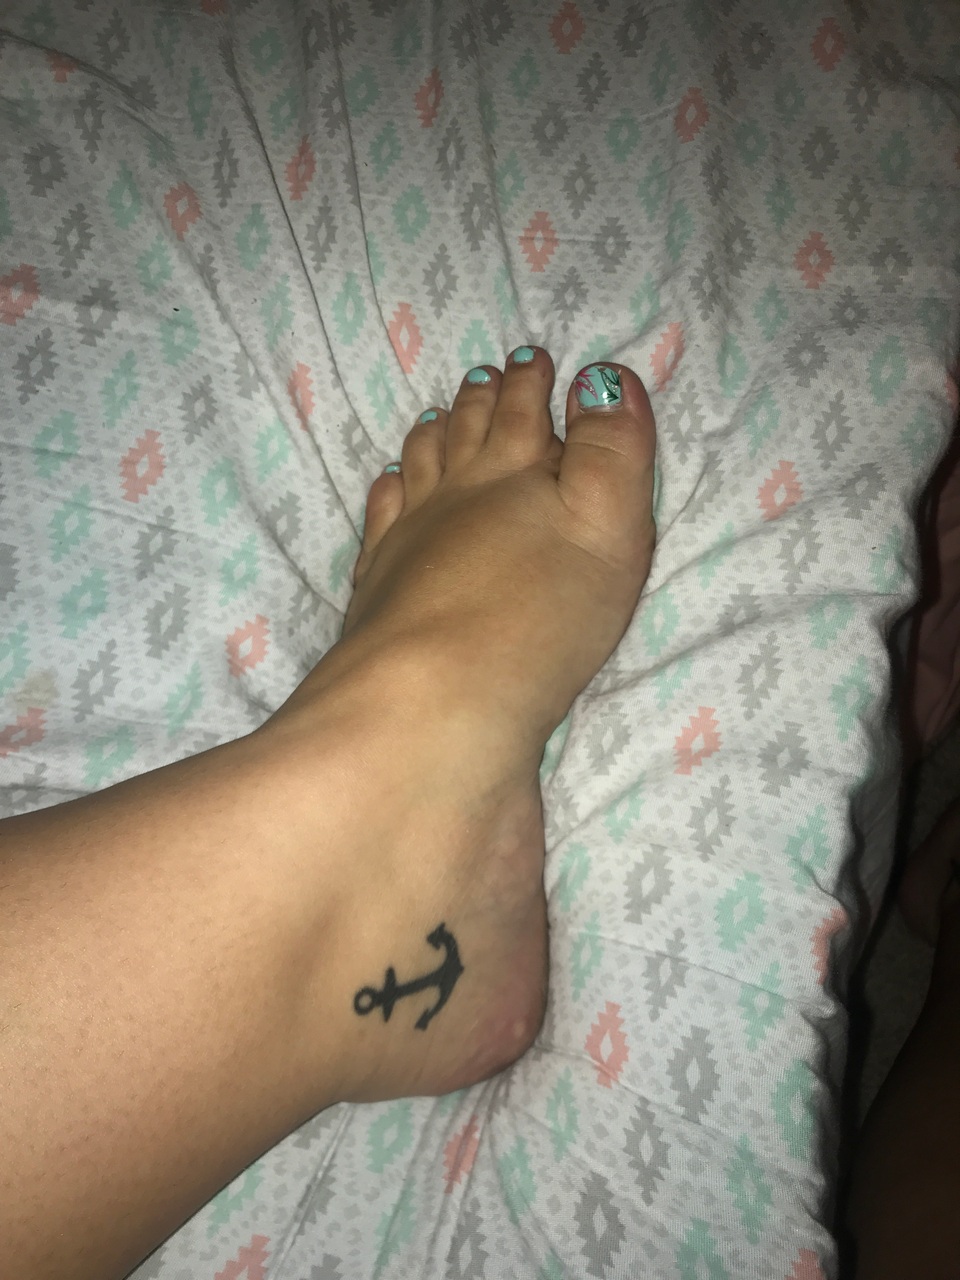 Feetprincess26 Getting My Toes Wet